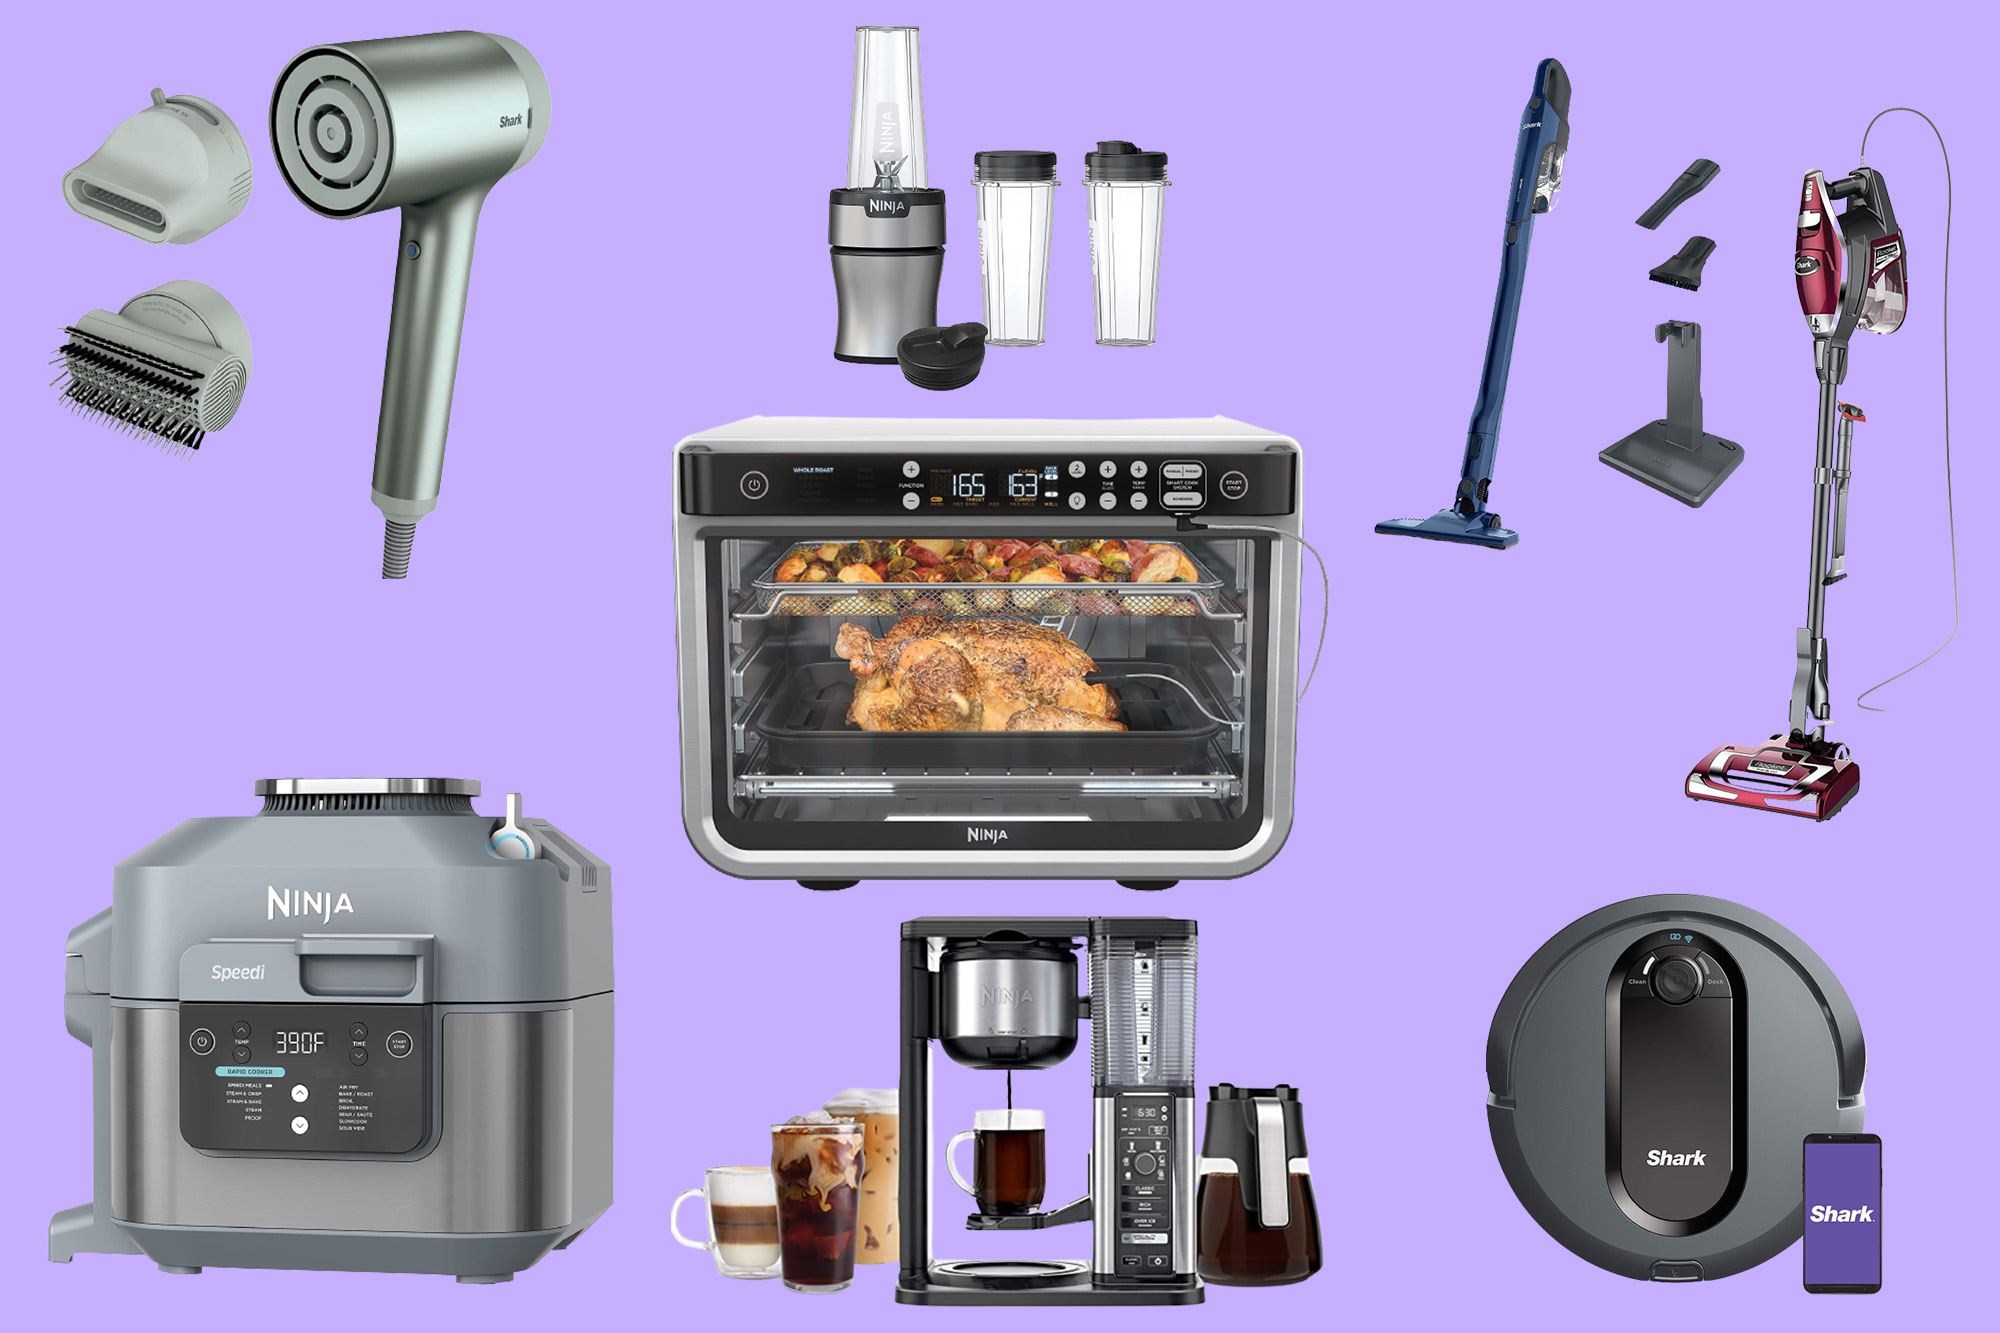 Ninja Appliances Review: The 7 Countertop Gadgets you Need from